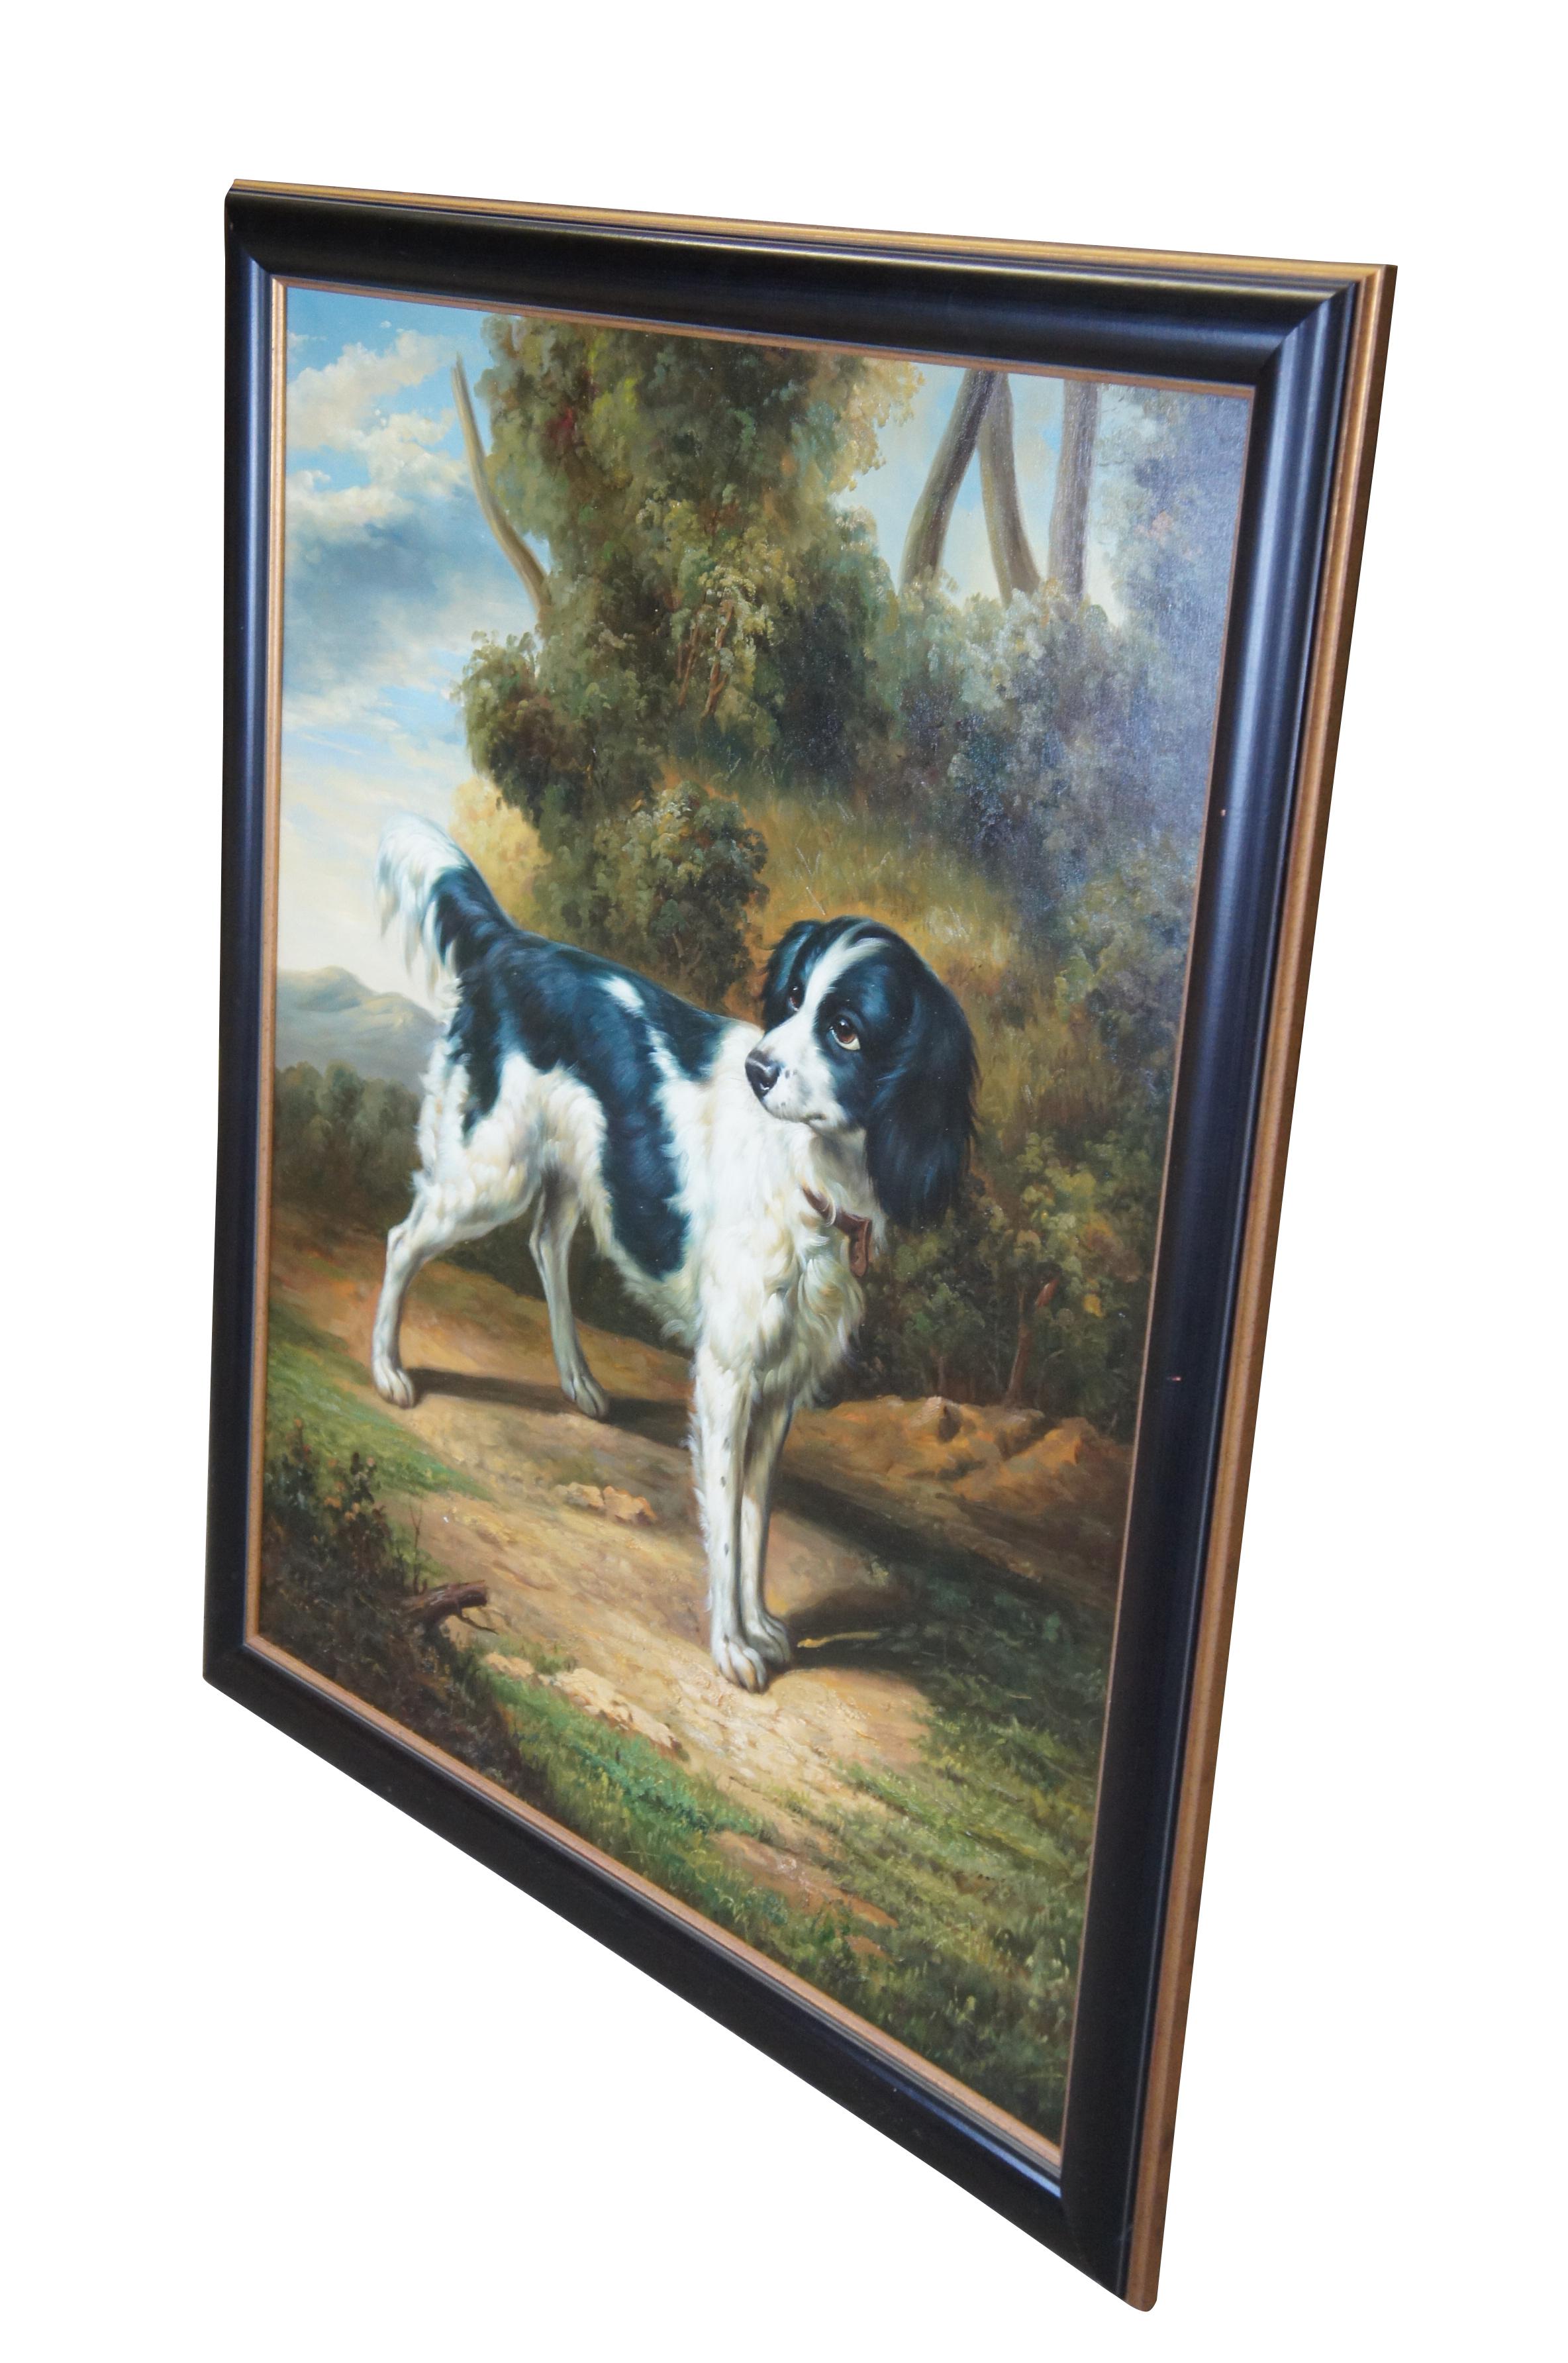 Large vintage black and white Springer Spaniel wooded landscape oil painting on canvas, after John Wootton. Framed in ebonized black frame with gold accents.

John Wootton (c.1686– 13 November 1764)[1] was an English painter of sporting subjects,